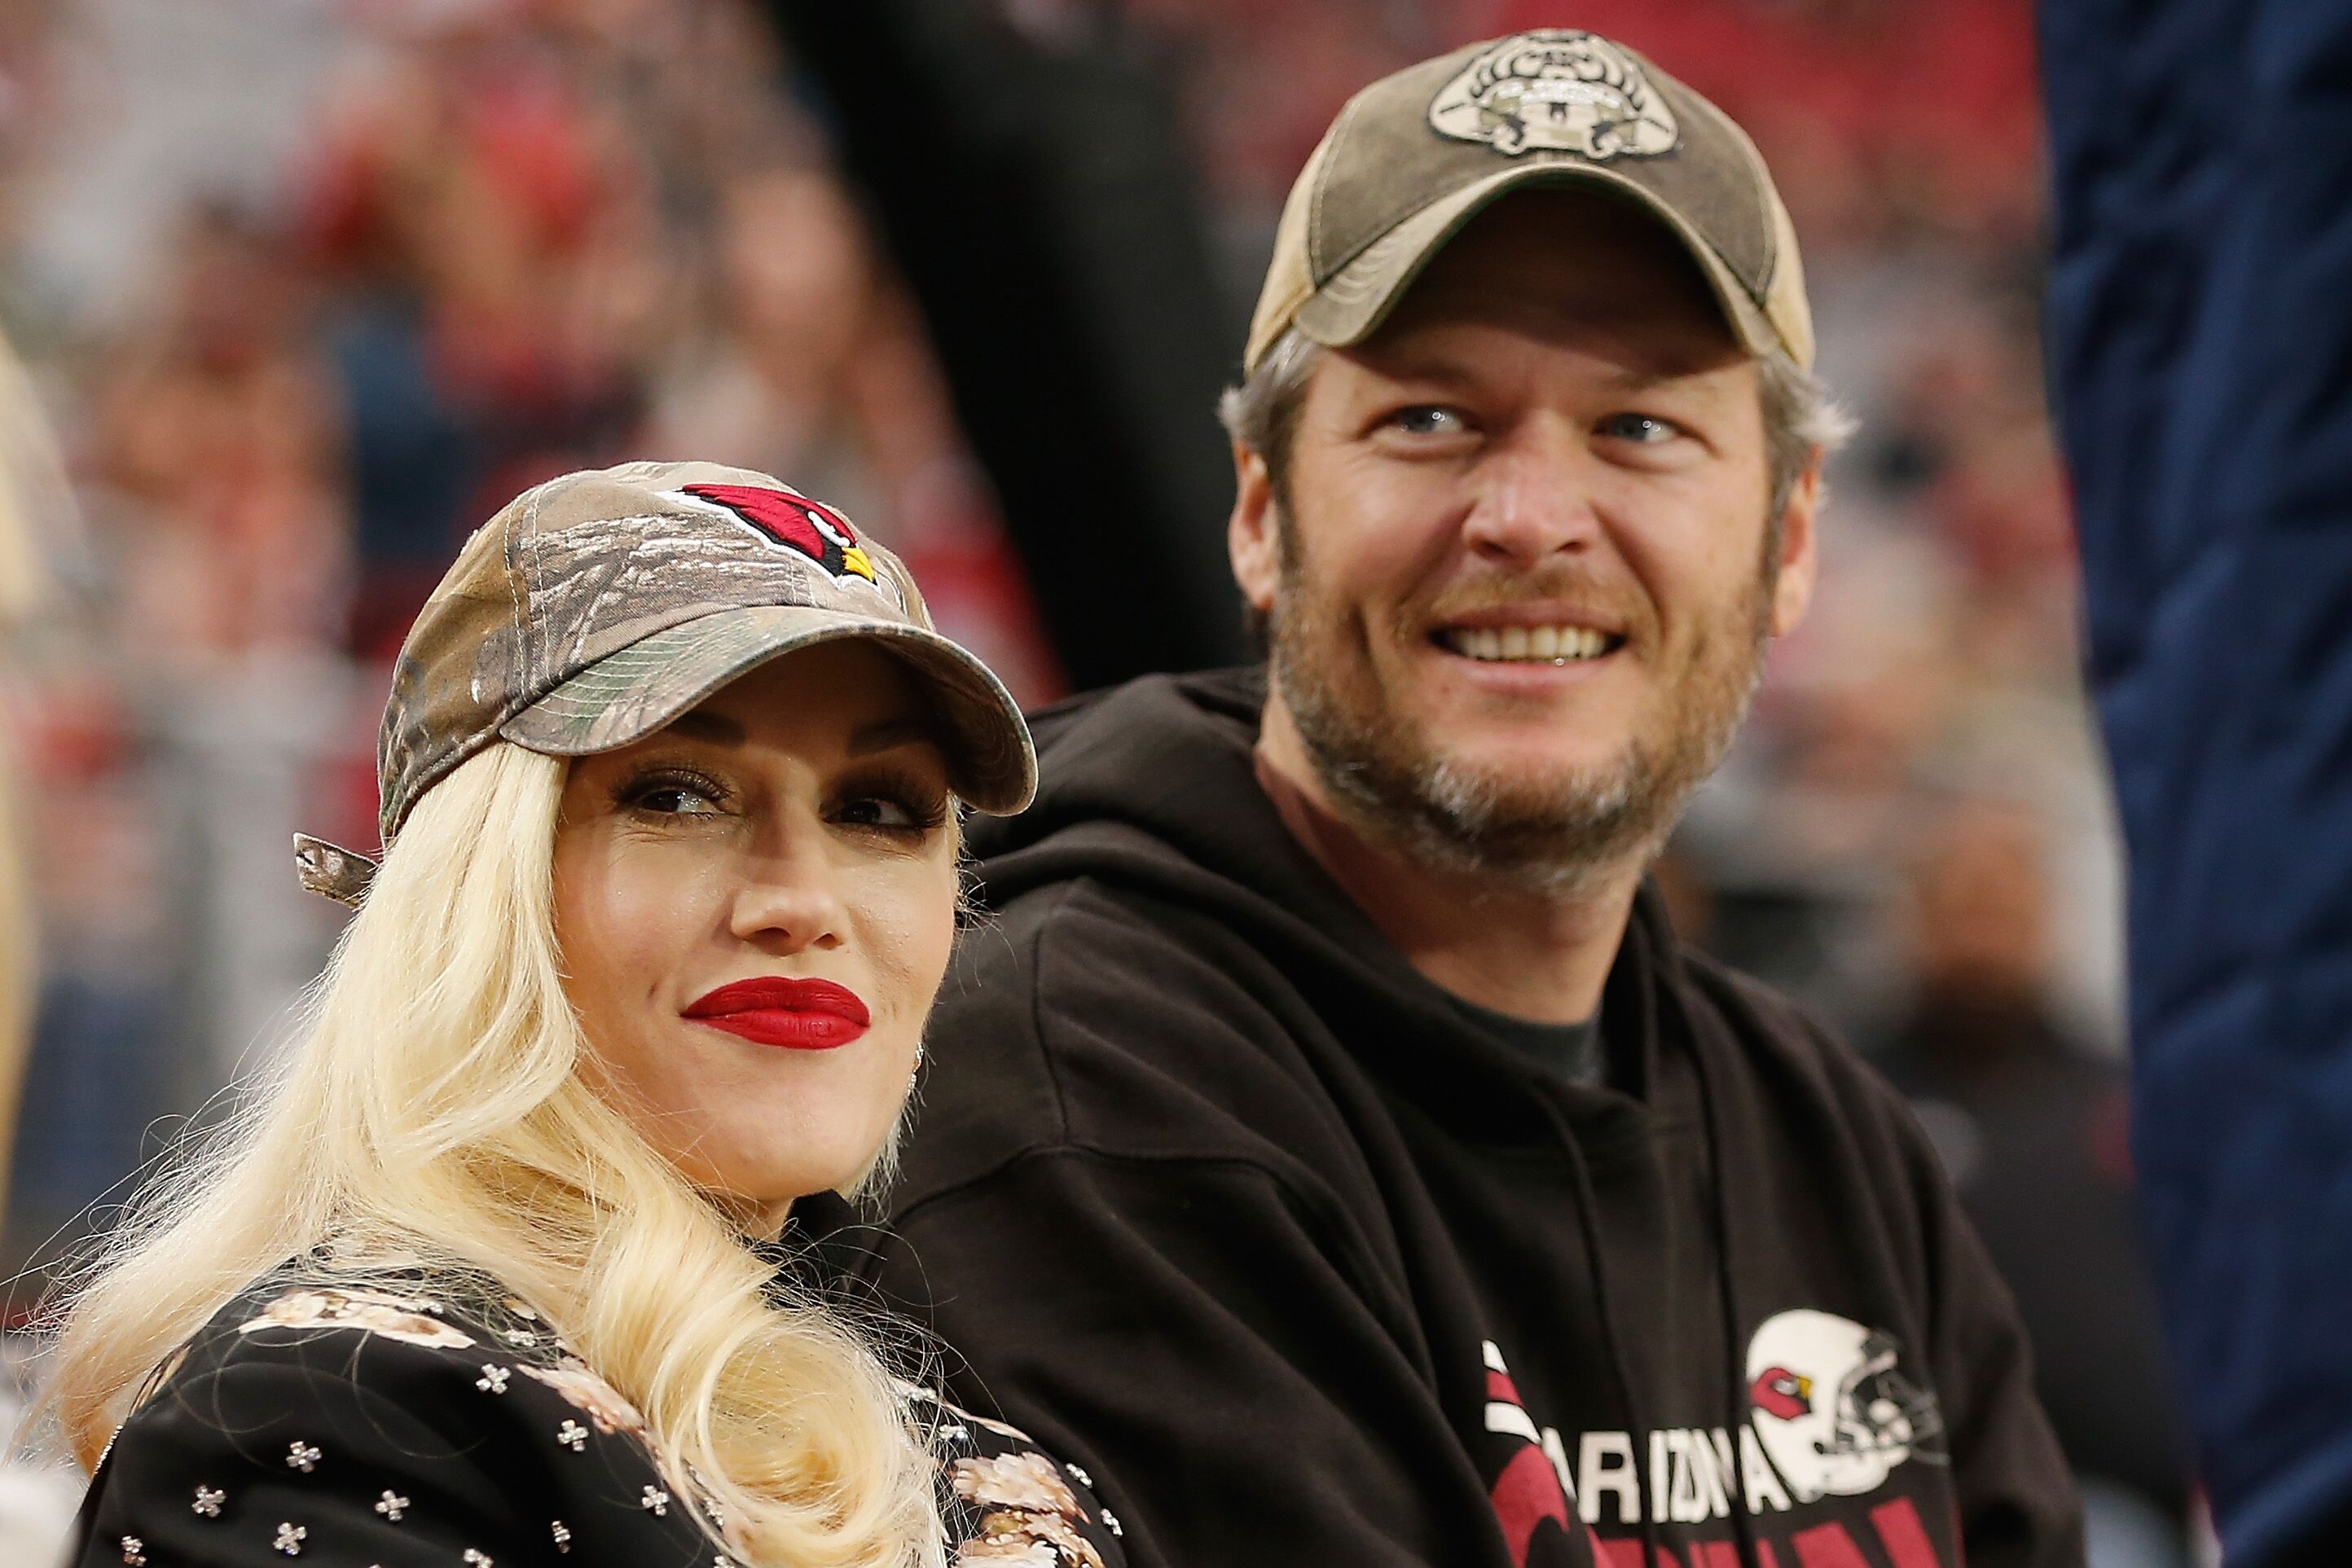 Musicians Gwen Stefani and Blake Shelton attend the NFL game between the Green Bay Packers and Arizona Cardinals at the University of Phoenix Stadium on December 27, 2015 in Glendale, Arizona.  | Source: Getty Images